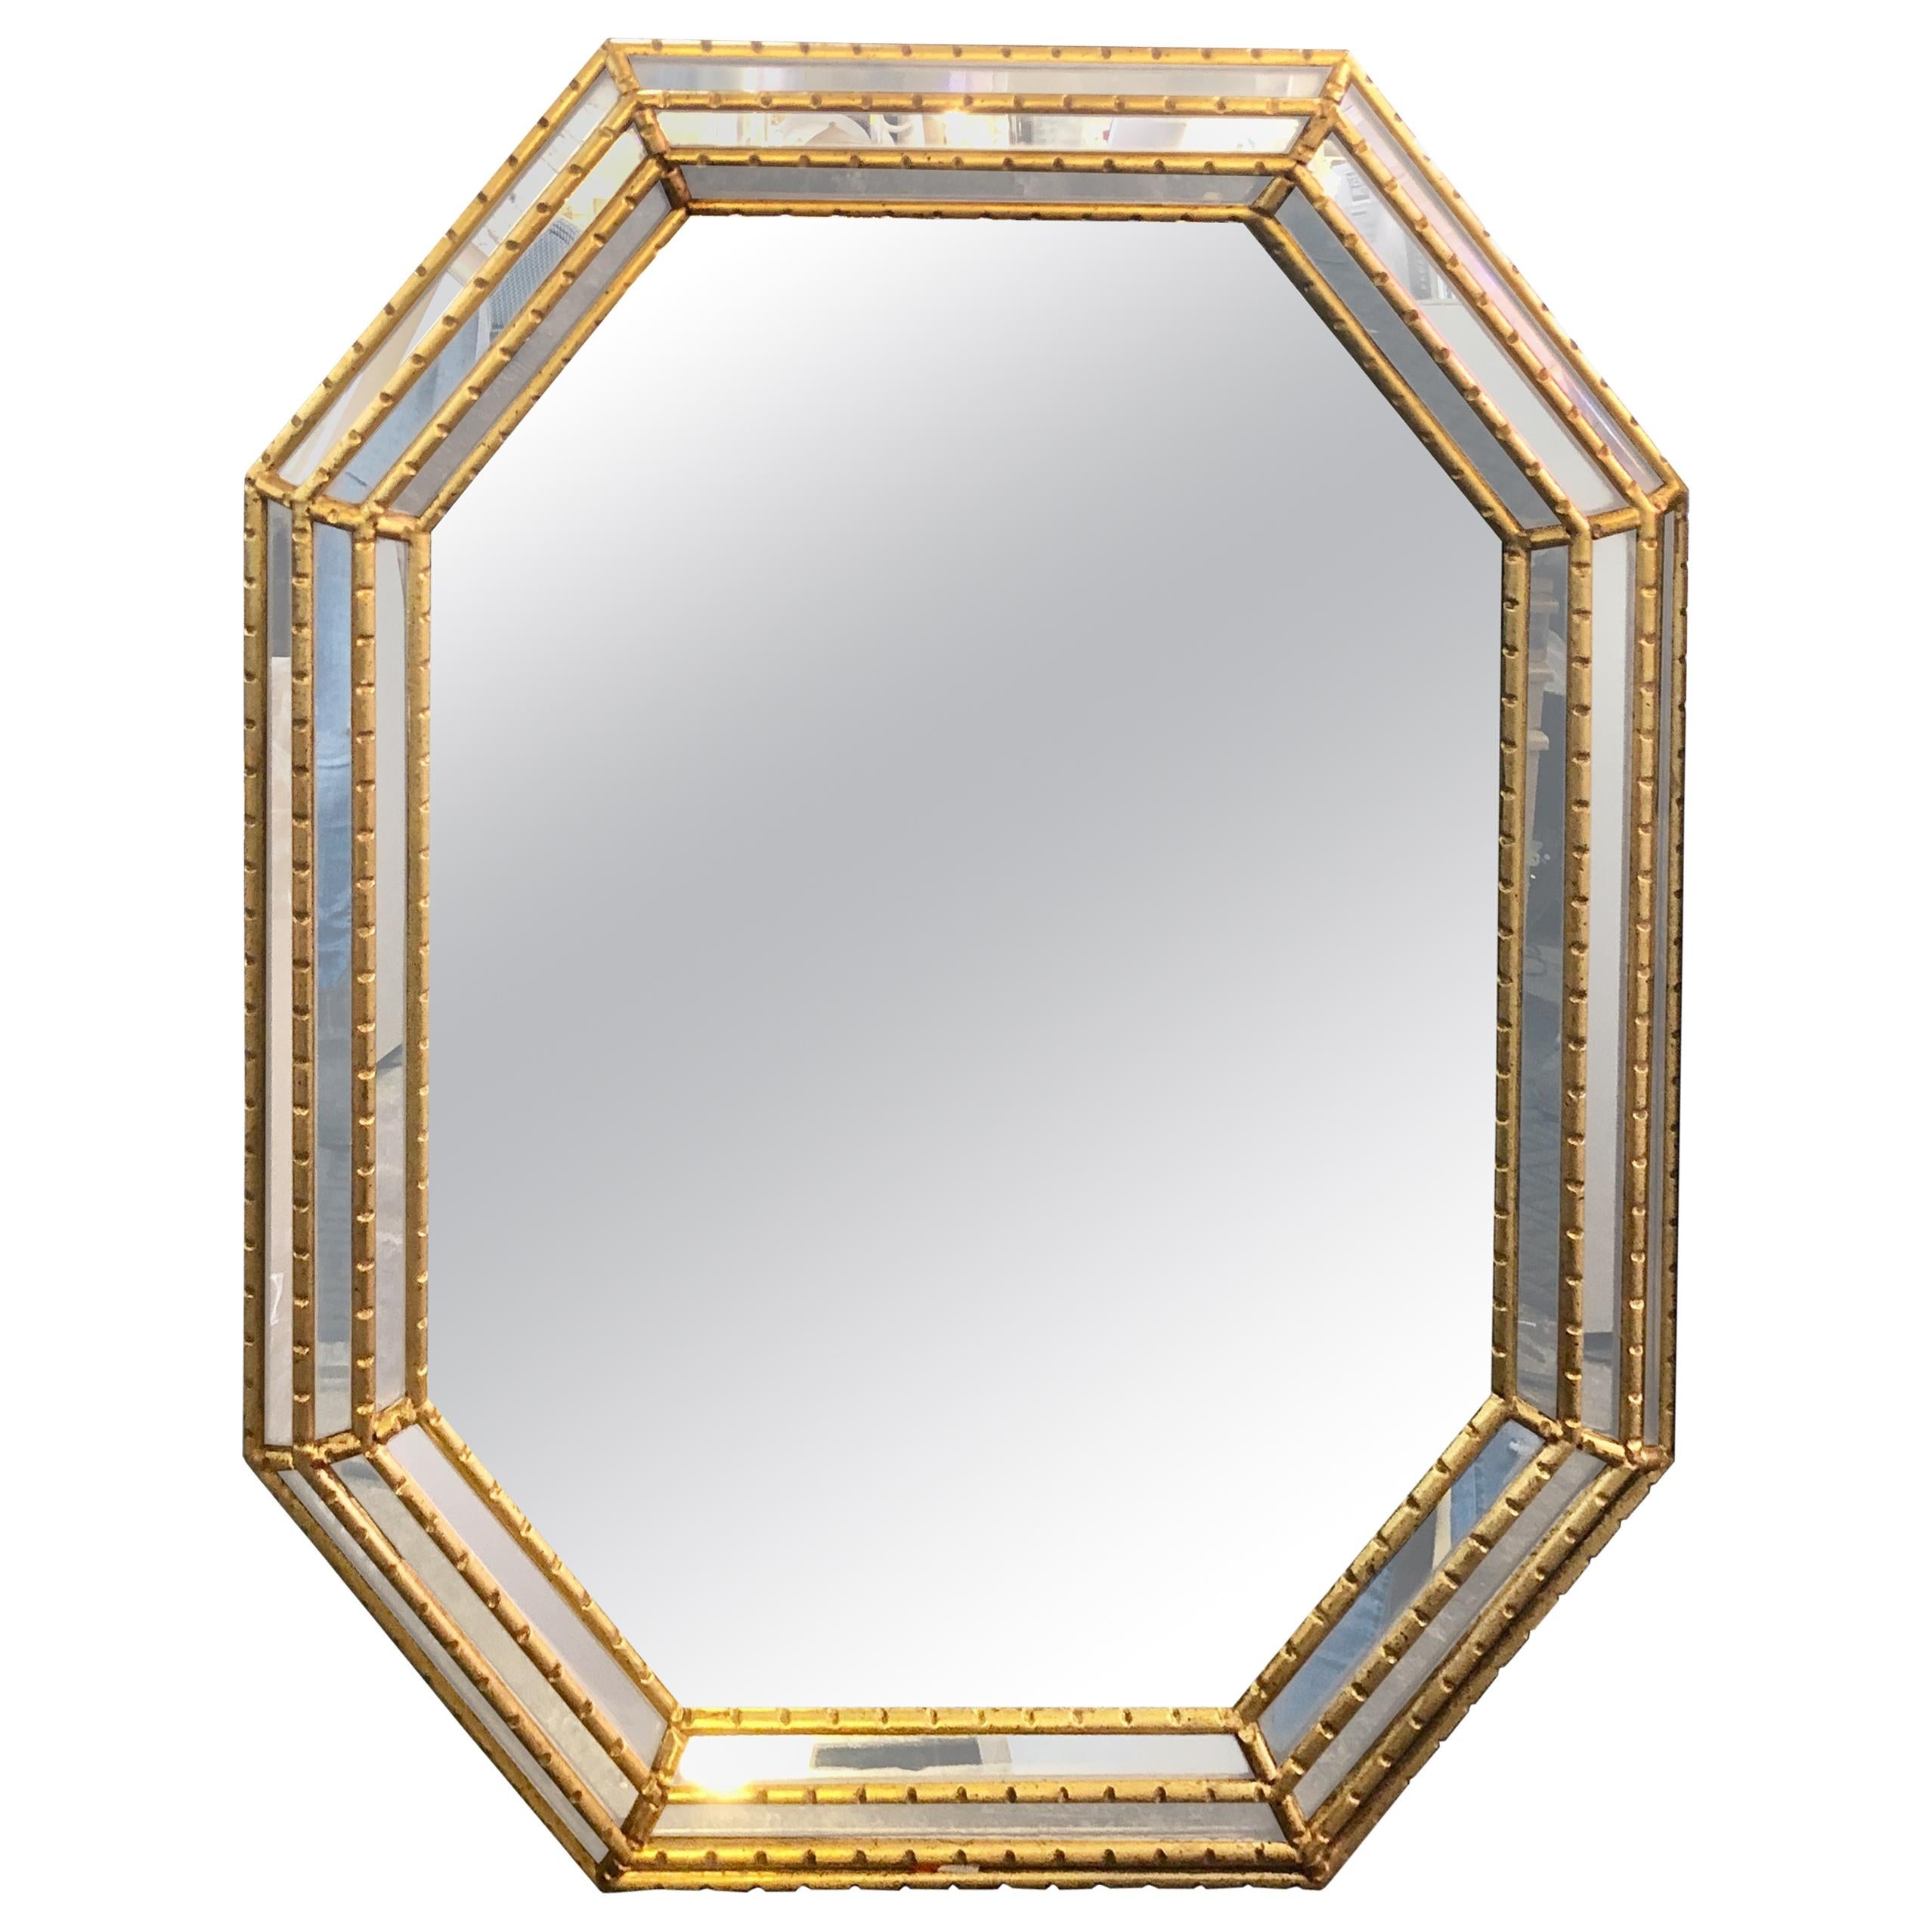 Pair of Hollywood Regency Style Gilt Faux Bamboo Octagonal Mirrors by La Barge